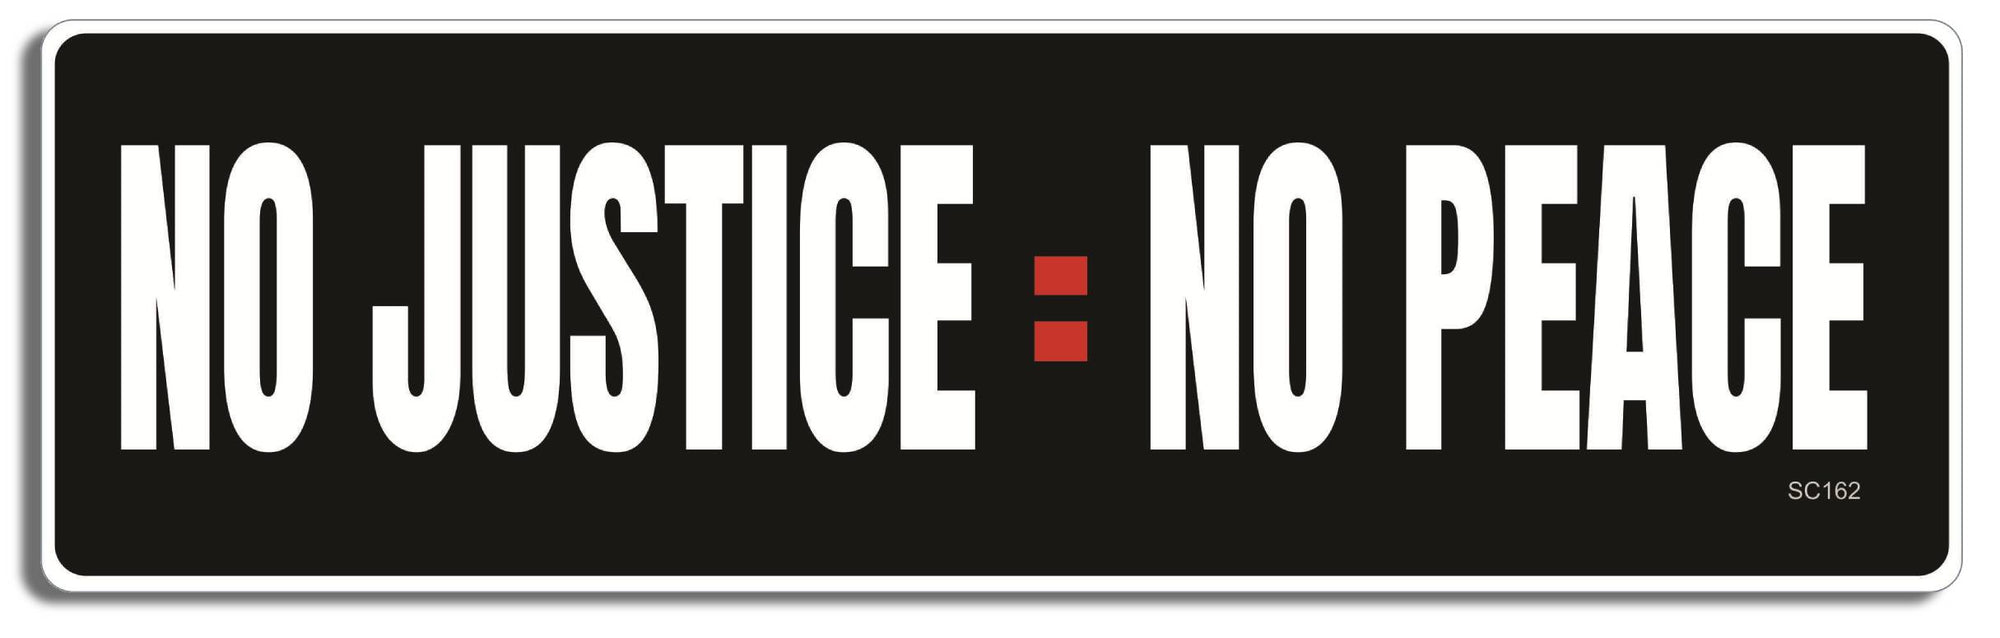 No justice = No Peace - 3" x 10" -  Decal Bumper Sticker-political Bumper Sticker Car Magnet No justice = No Peace-  Decal for carsconservative, liberal, Political